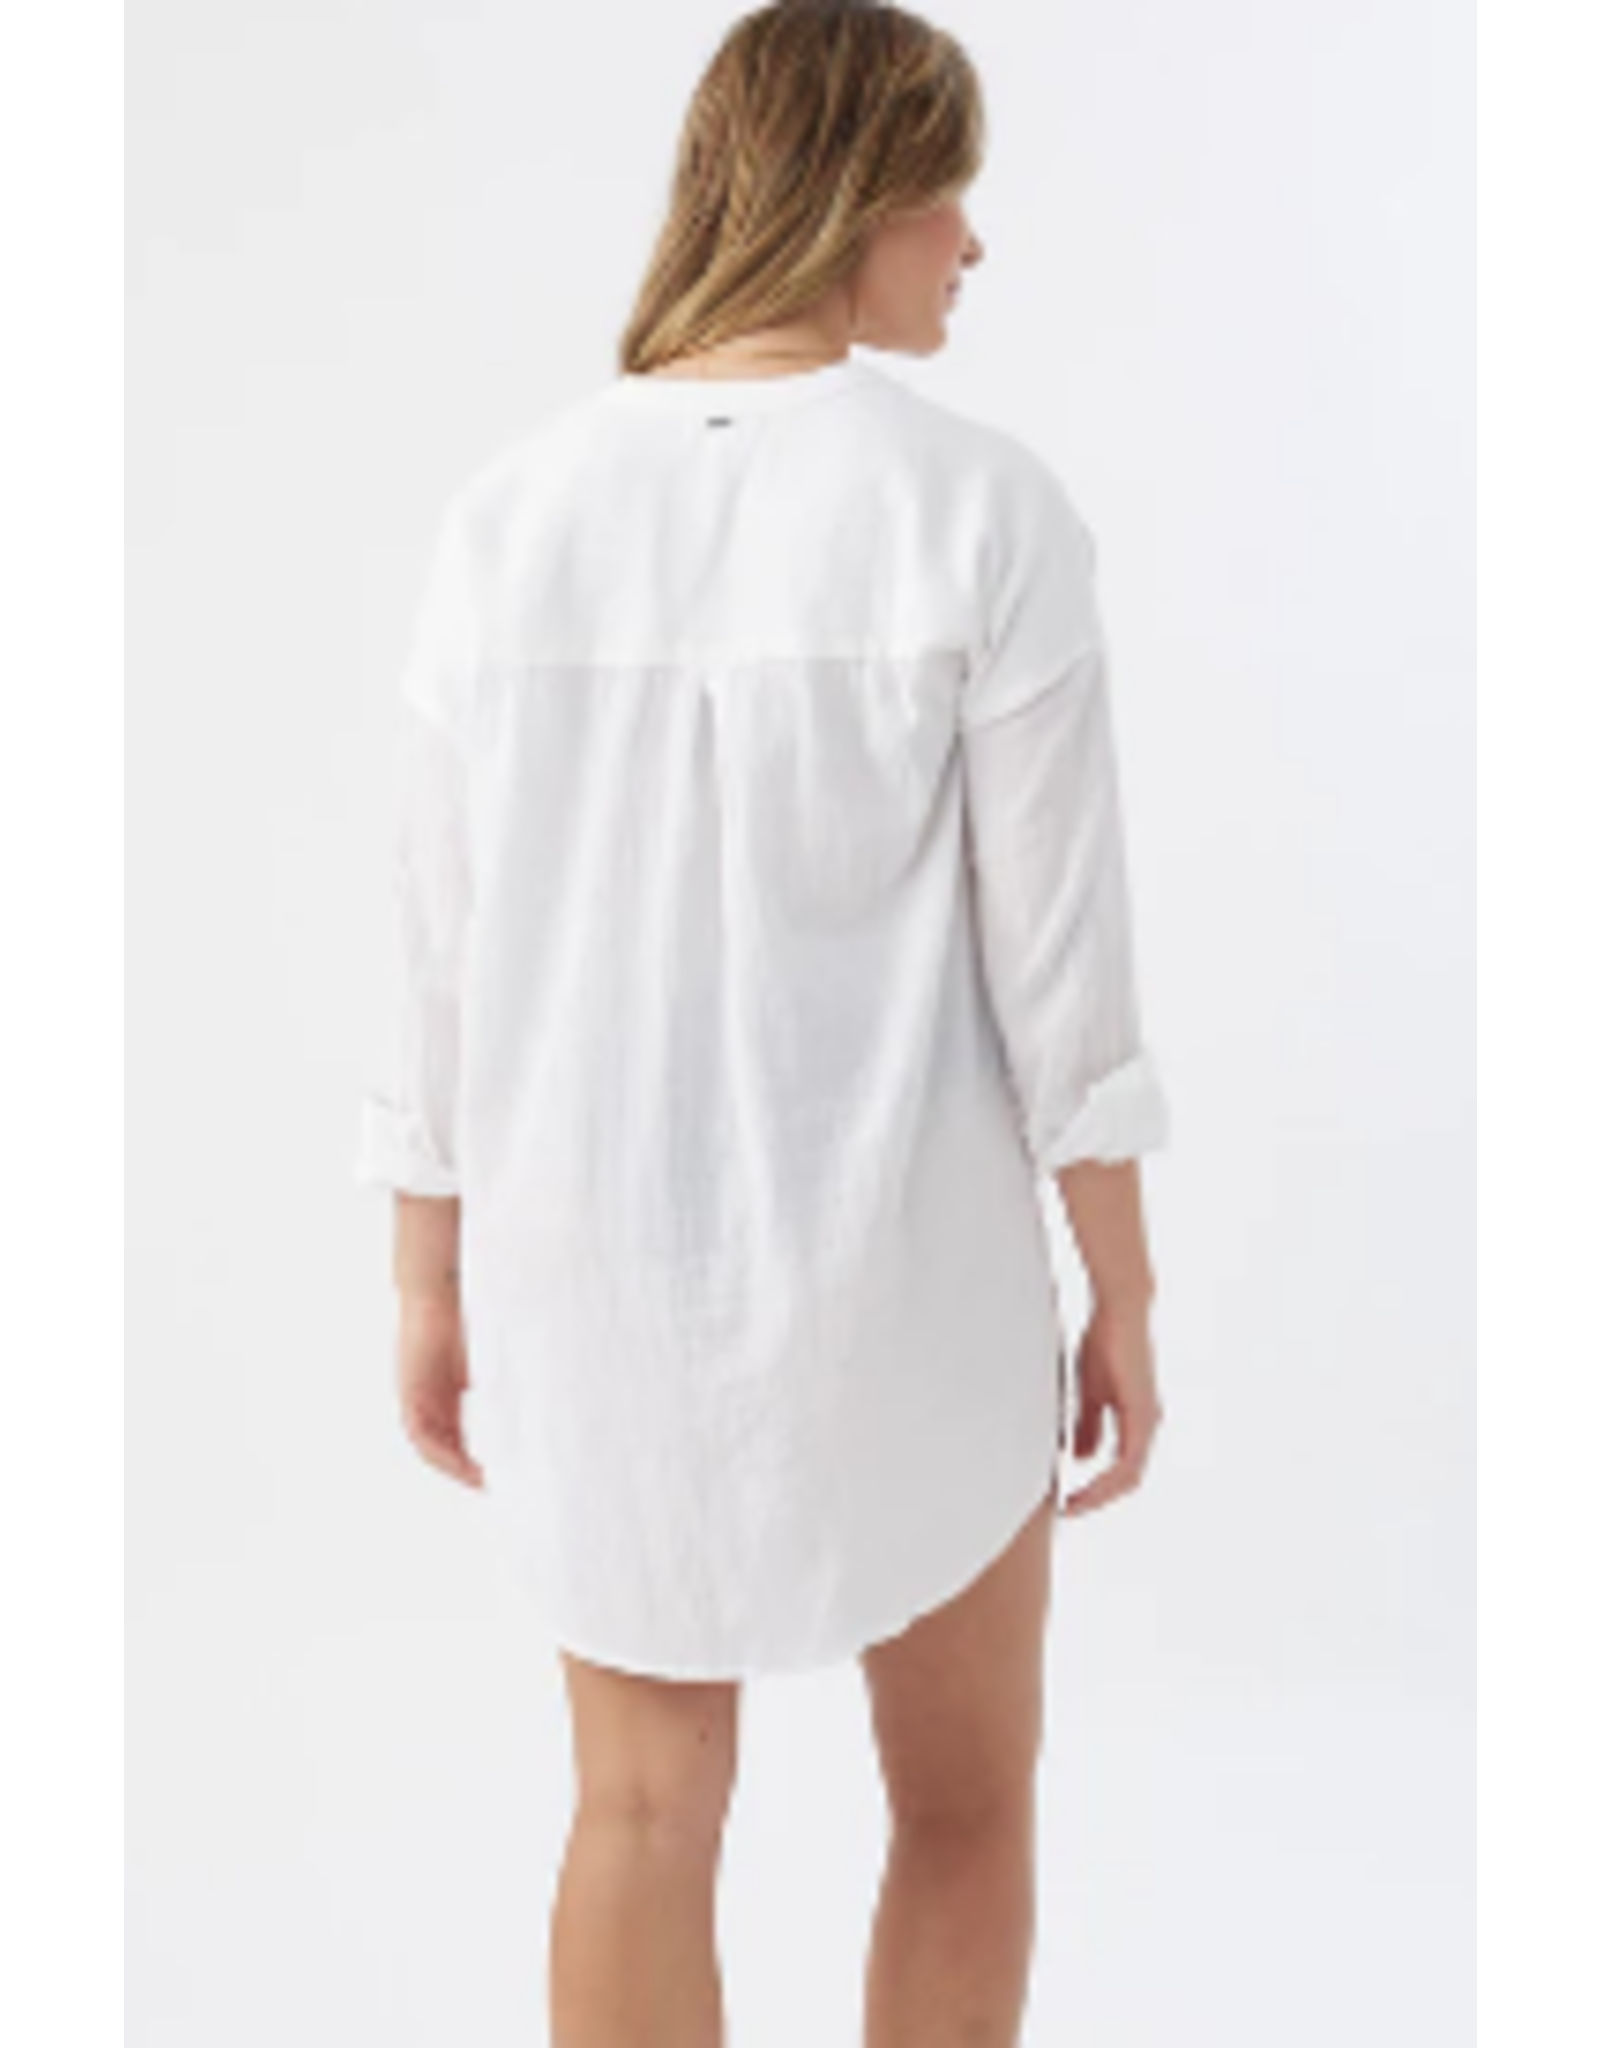 ONEILL SALTWATER SOLIDS BELIZIN COVER-UP TUNIC